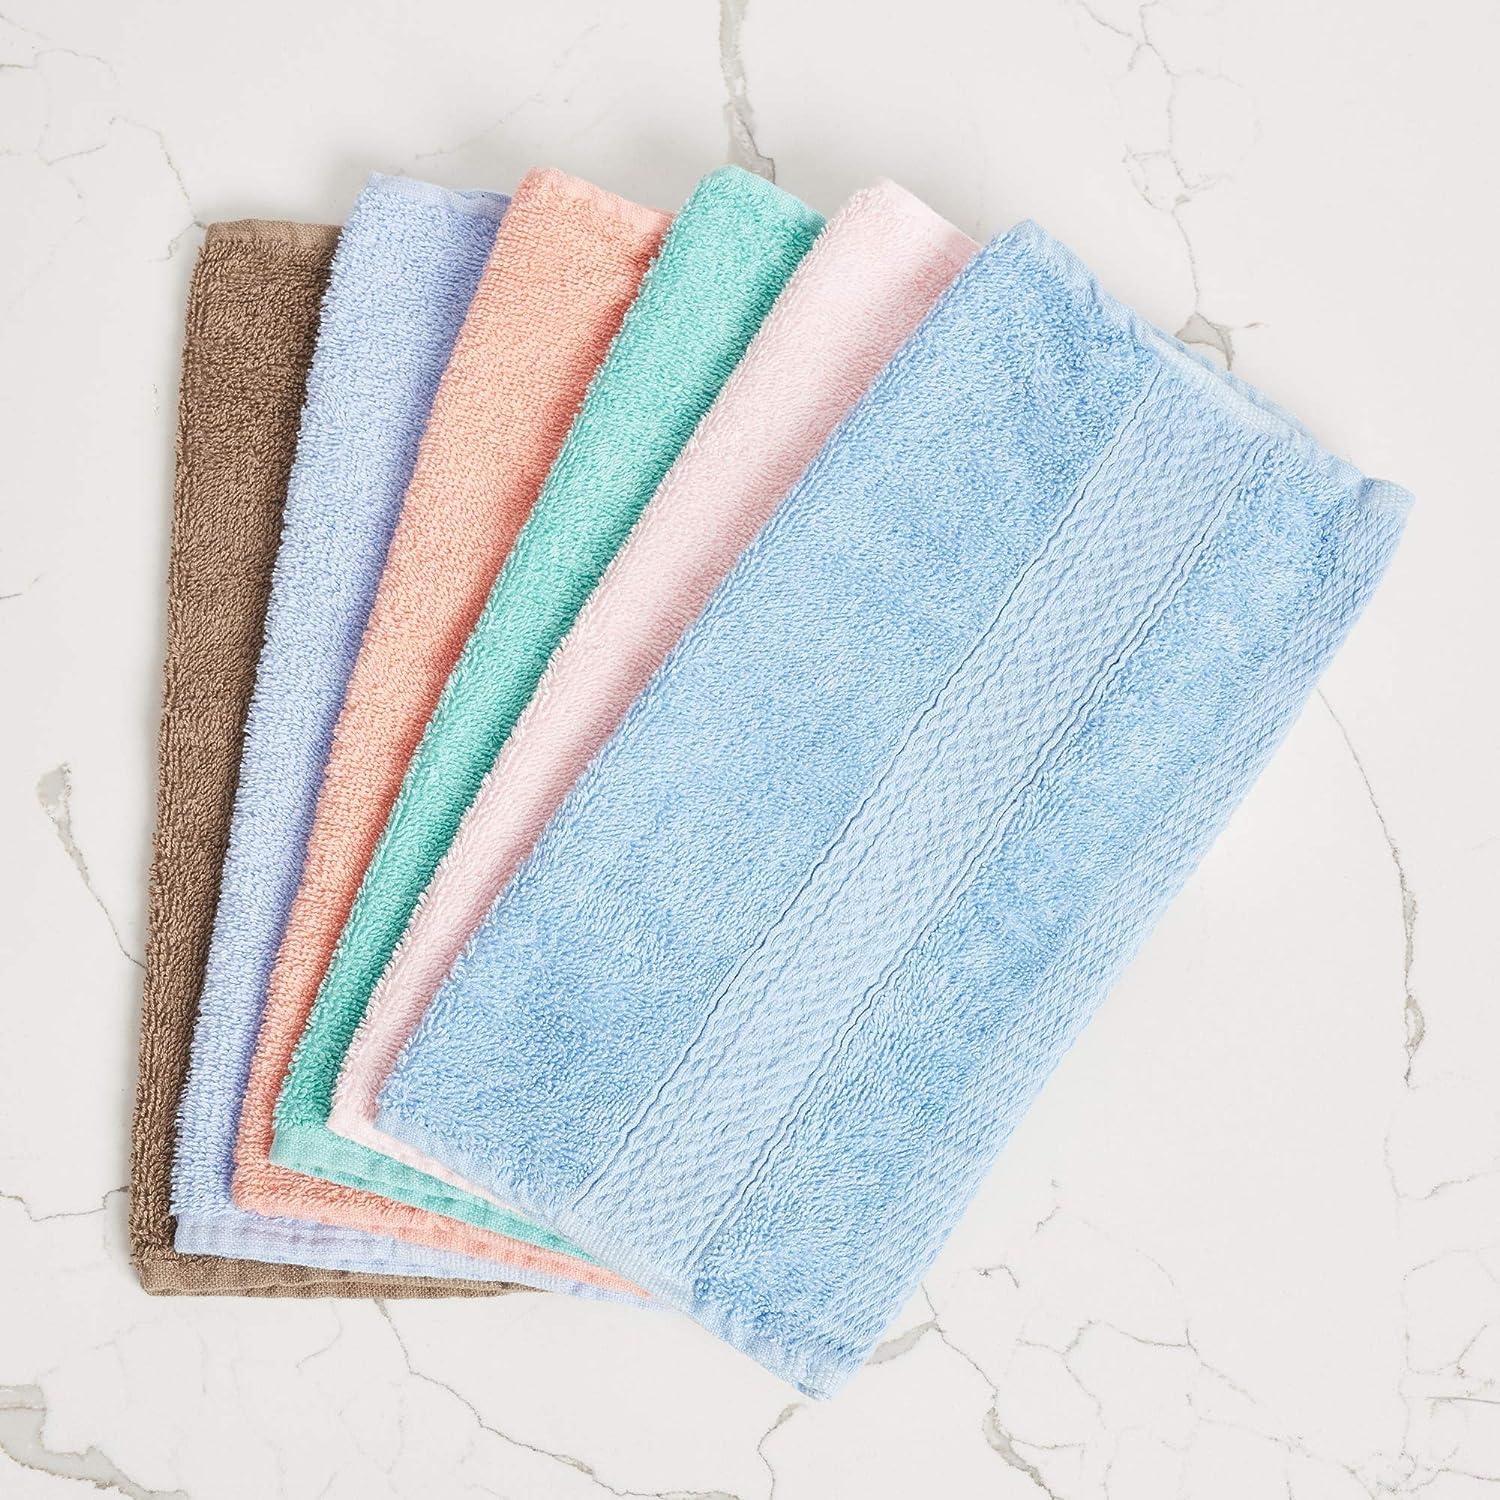 Pleasant Home Wash Cloths Set - 12 Pack (12” x 12”) – 509 GSM- 100% Ring  Spun Cotton Wash Cloth - Super Soft and Highly Absorbent Face Towels  (Blush